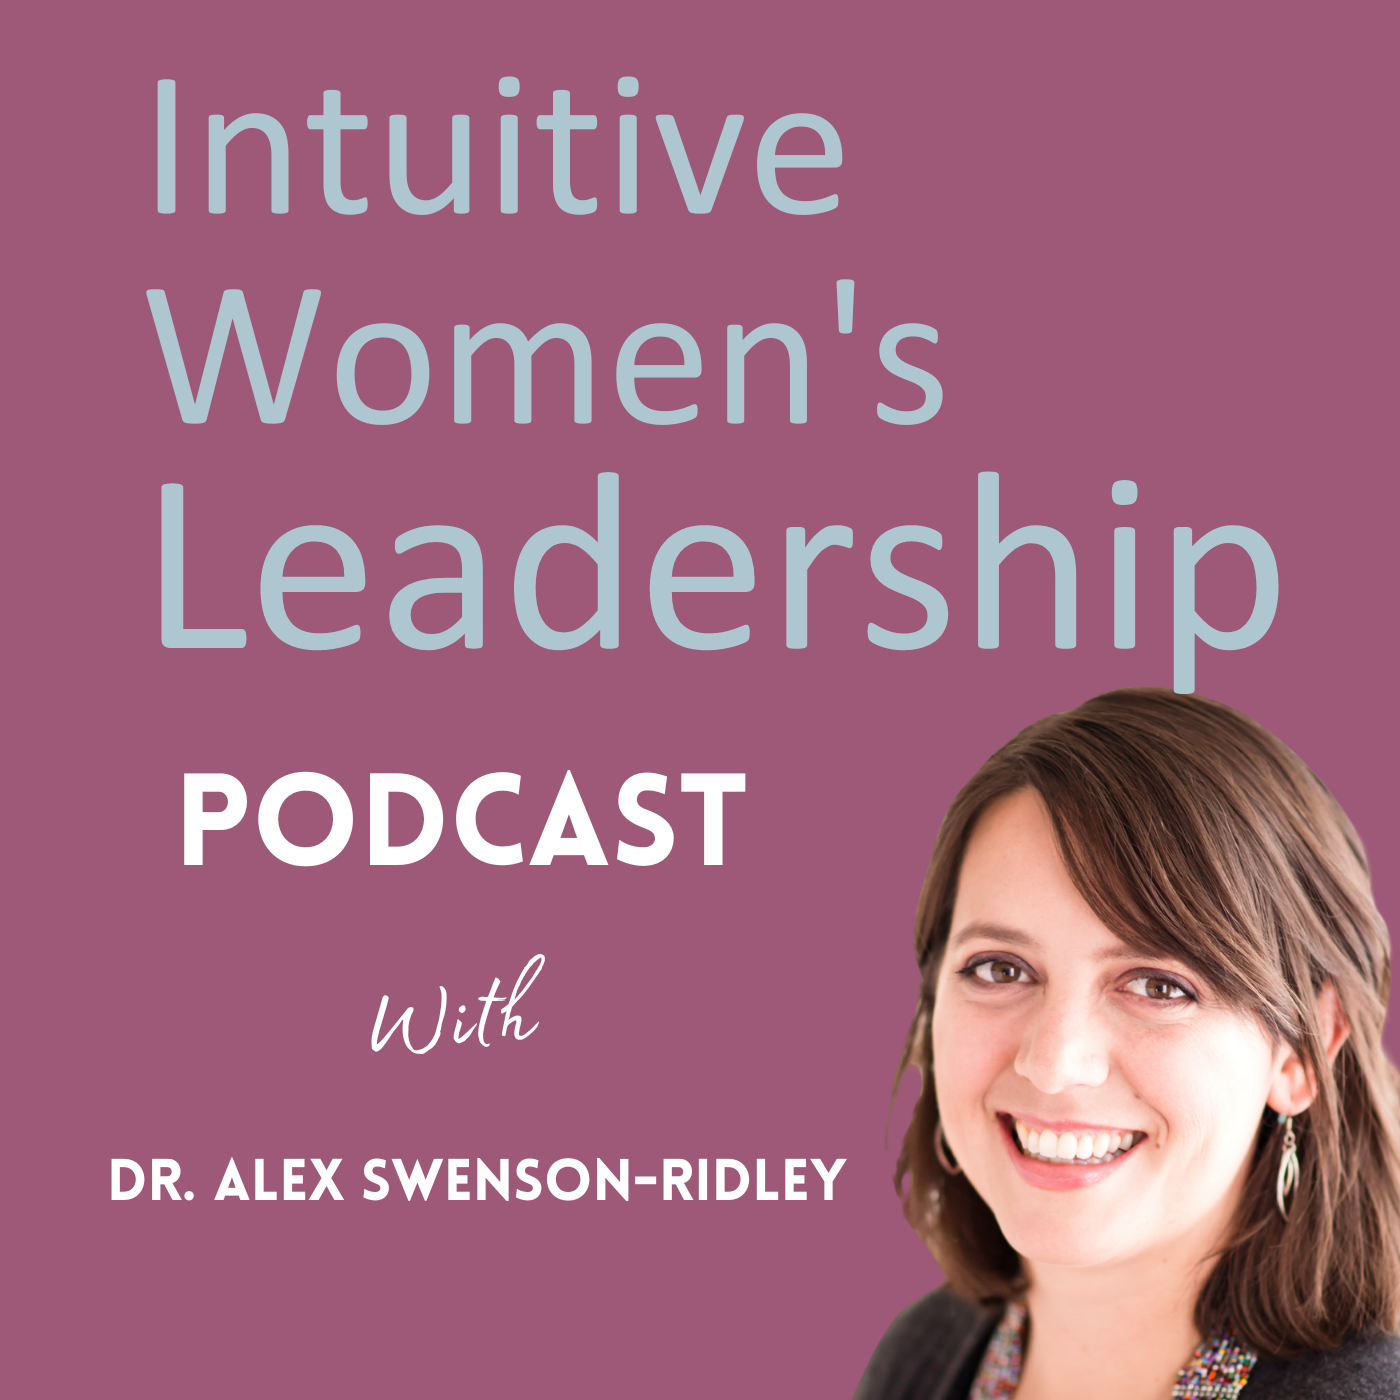 Artwork for podcast Intuitive Women's Leadership Podcast